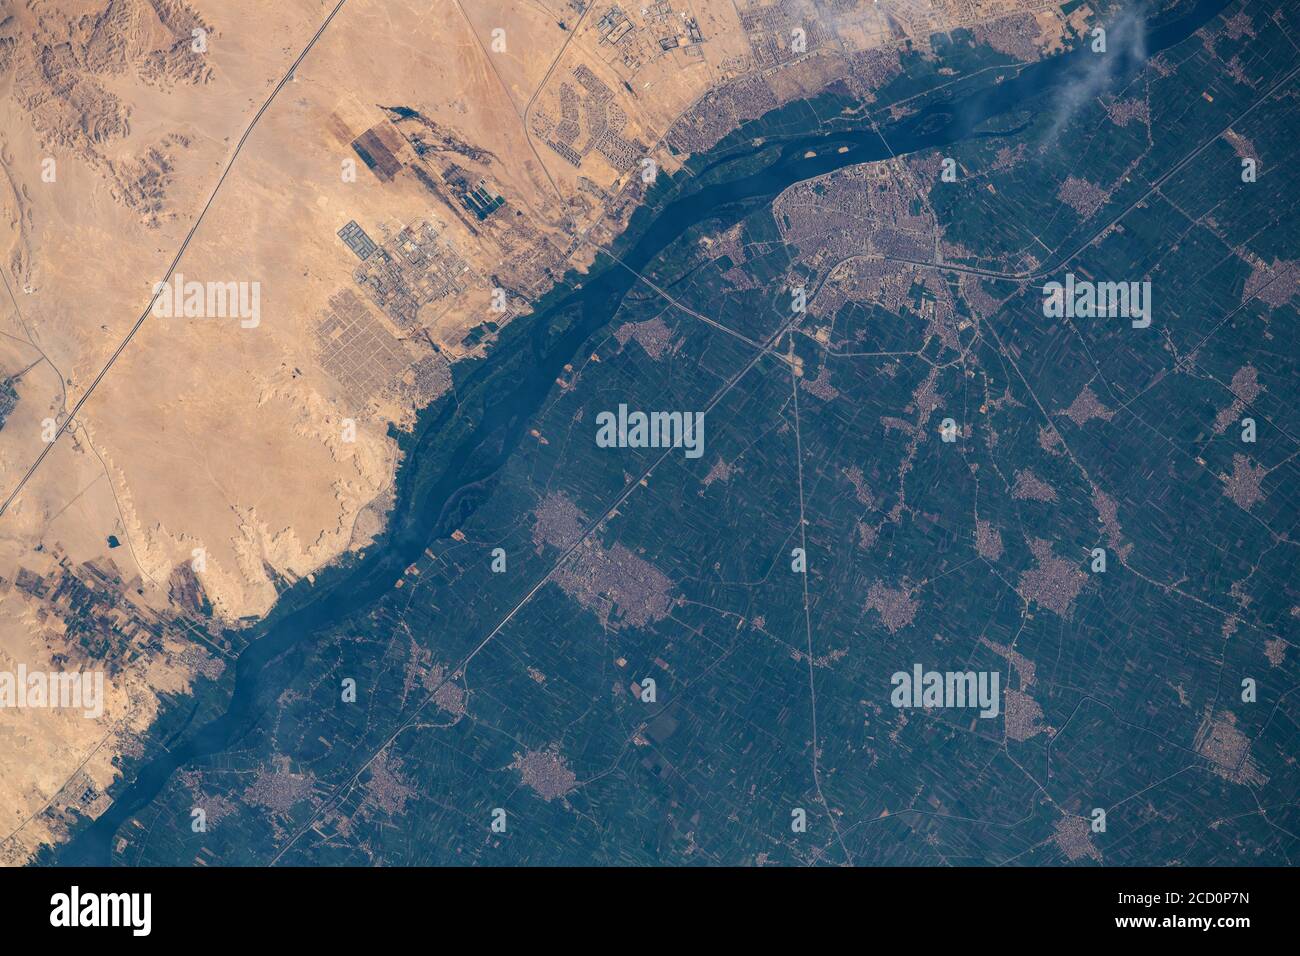 EGYPT - 11 August 2020 - The International Space Station was orbiting above Egypt just east of the Nile River when this photograph was taken of the ci Stock Photo